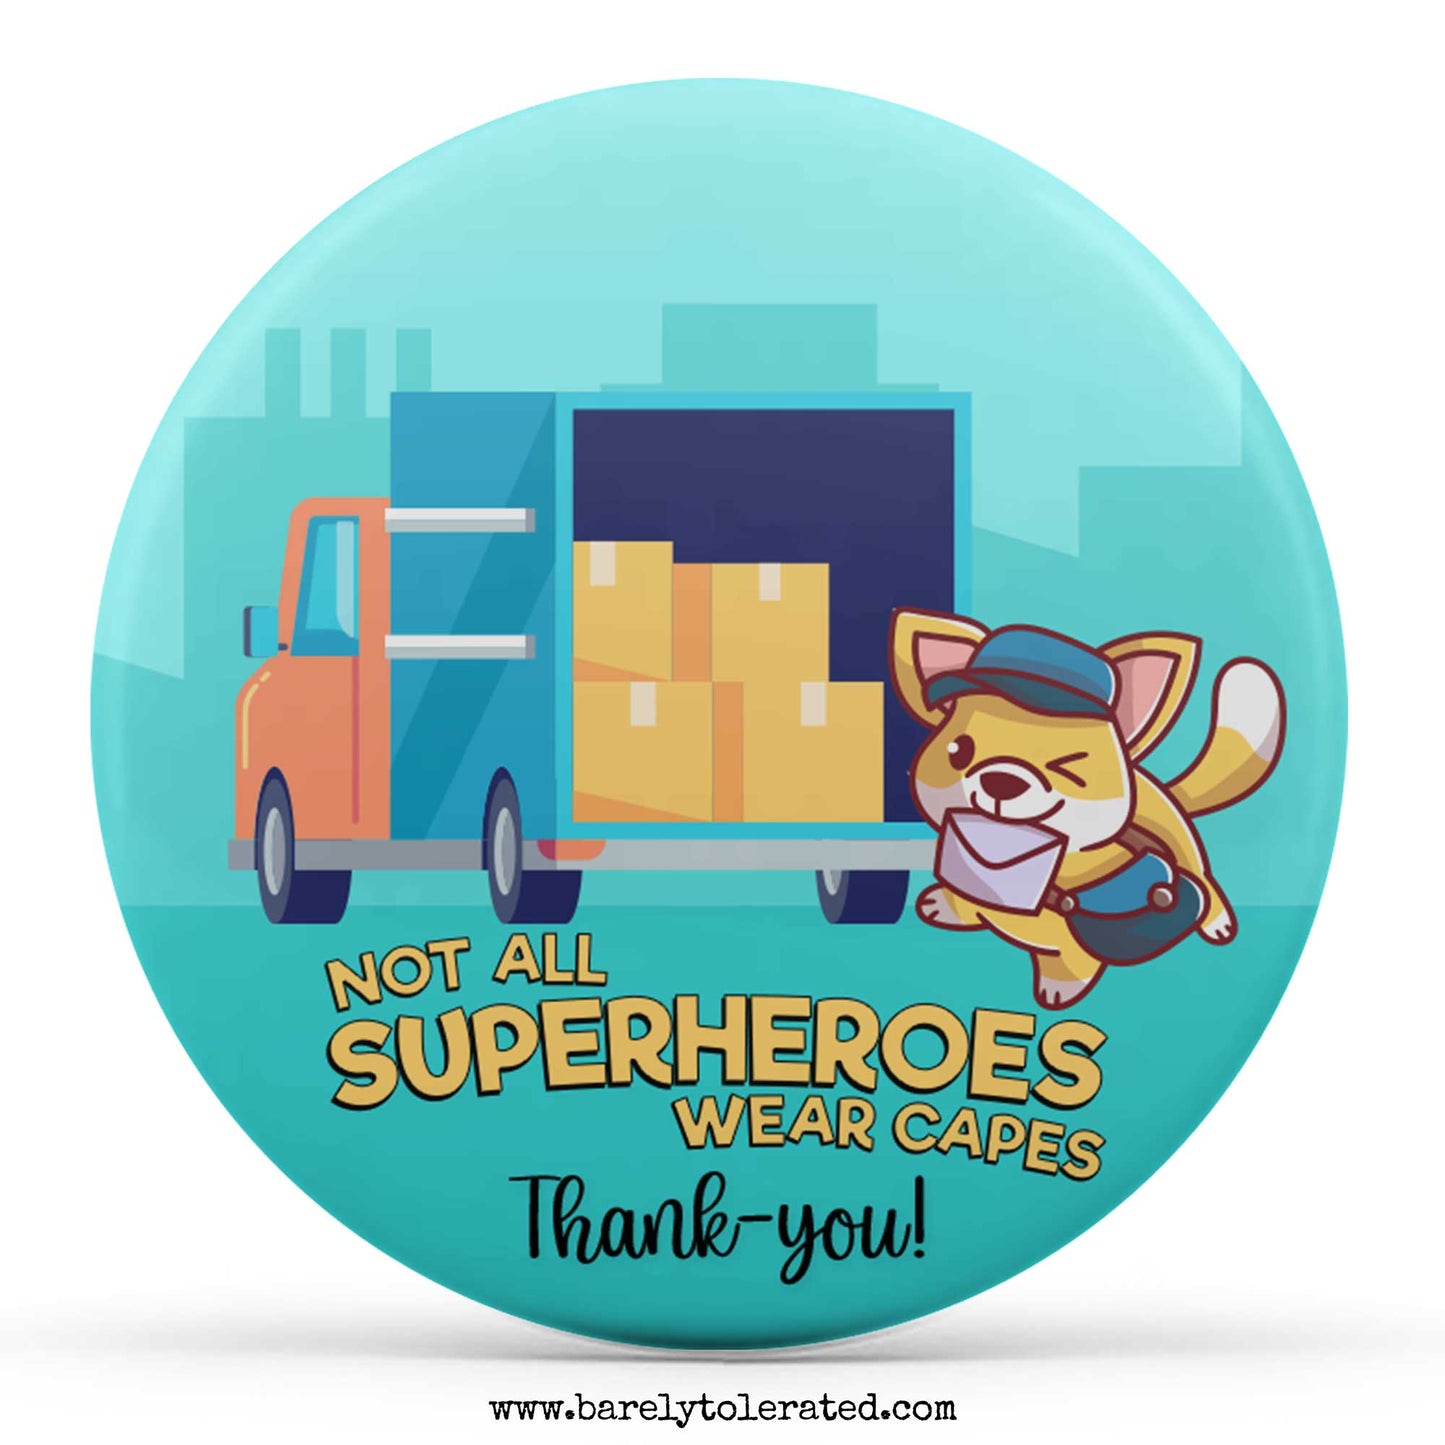 Not All Superheroes Wear Capes - Thank-you!